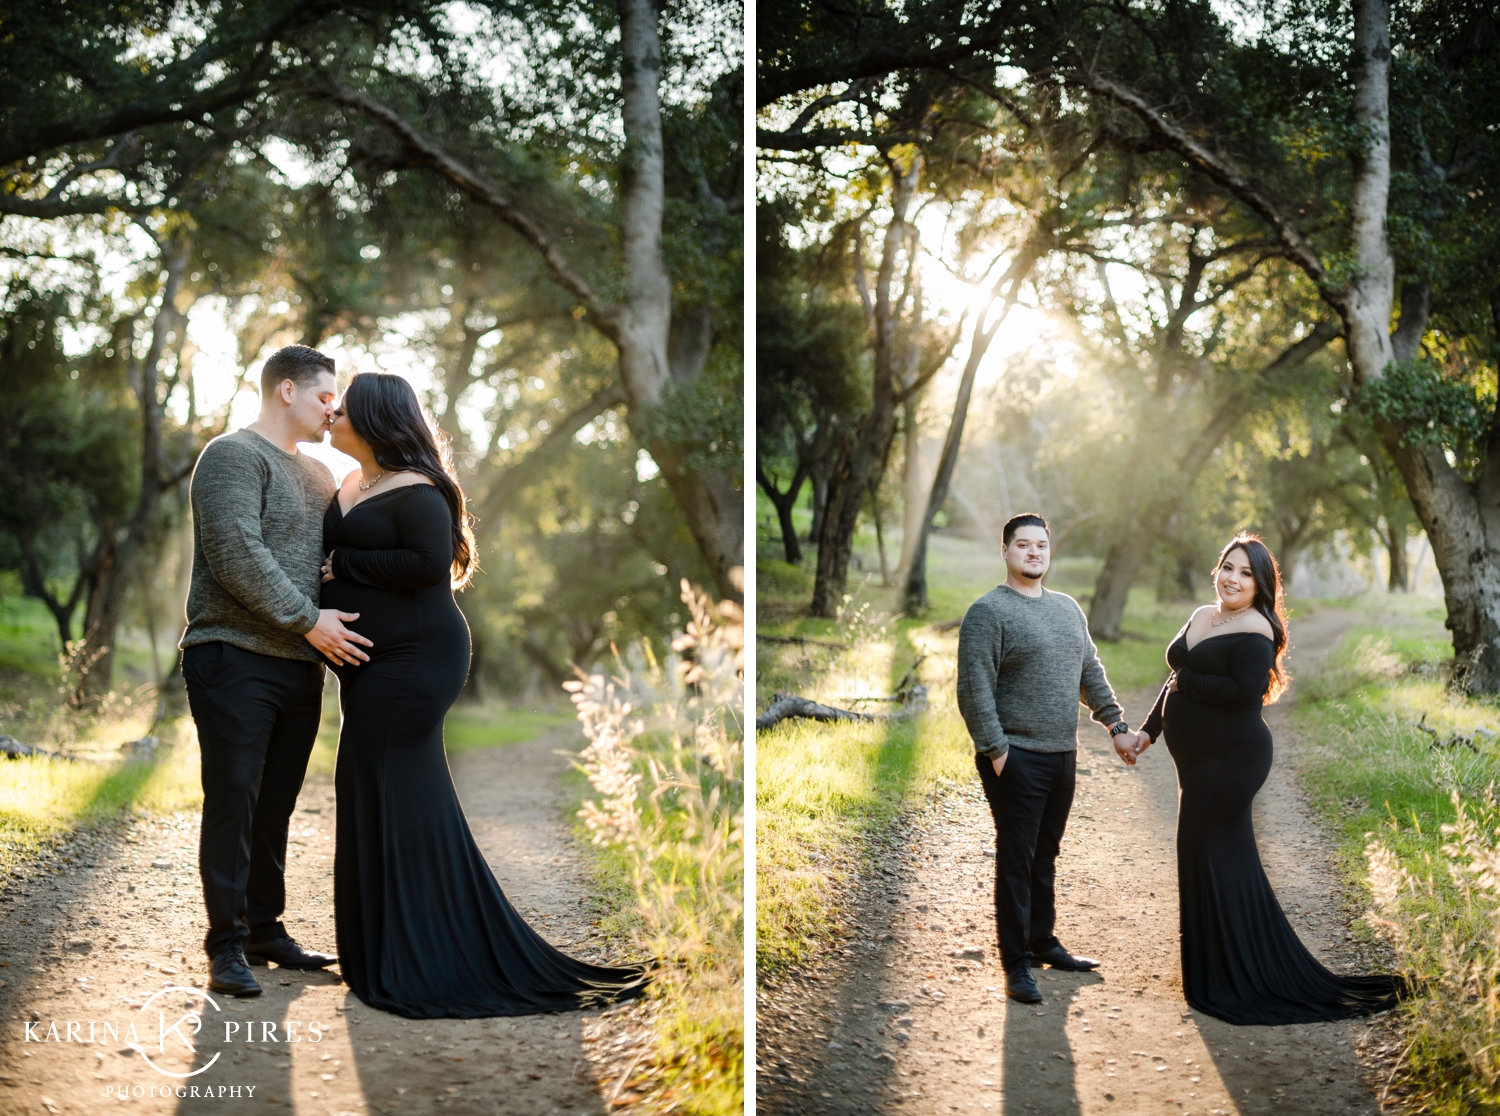 Los Angeles Maternity Session by Karina Pires Photography